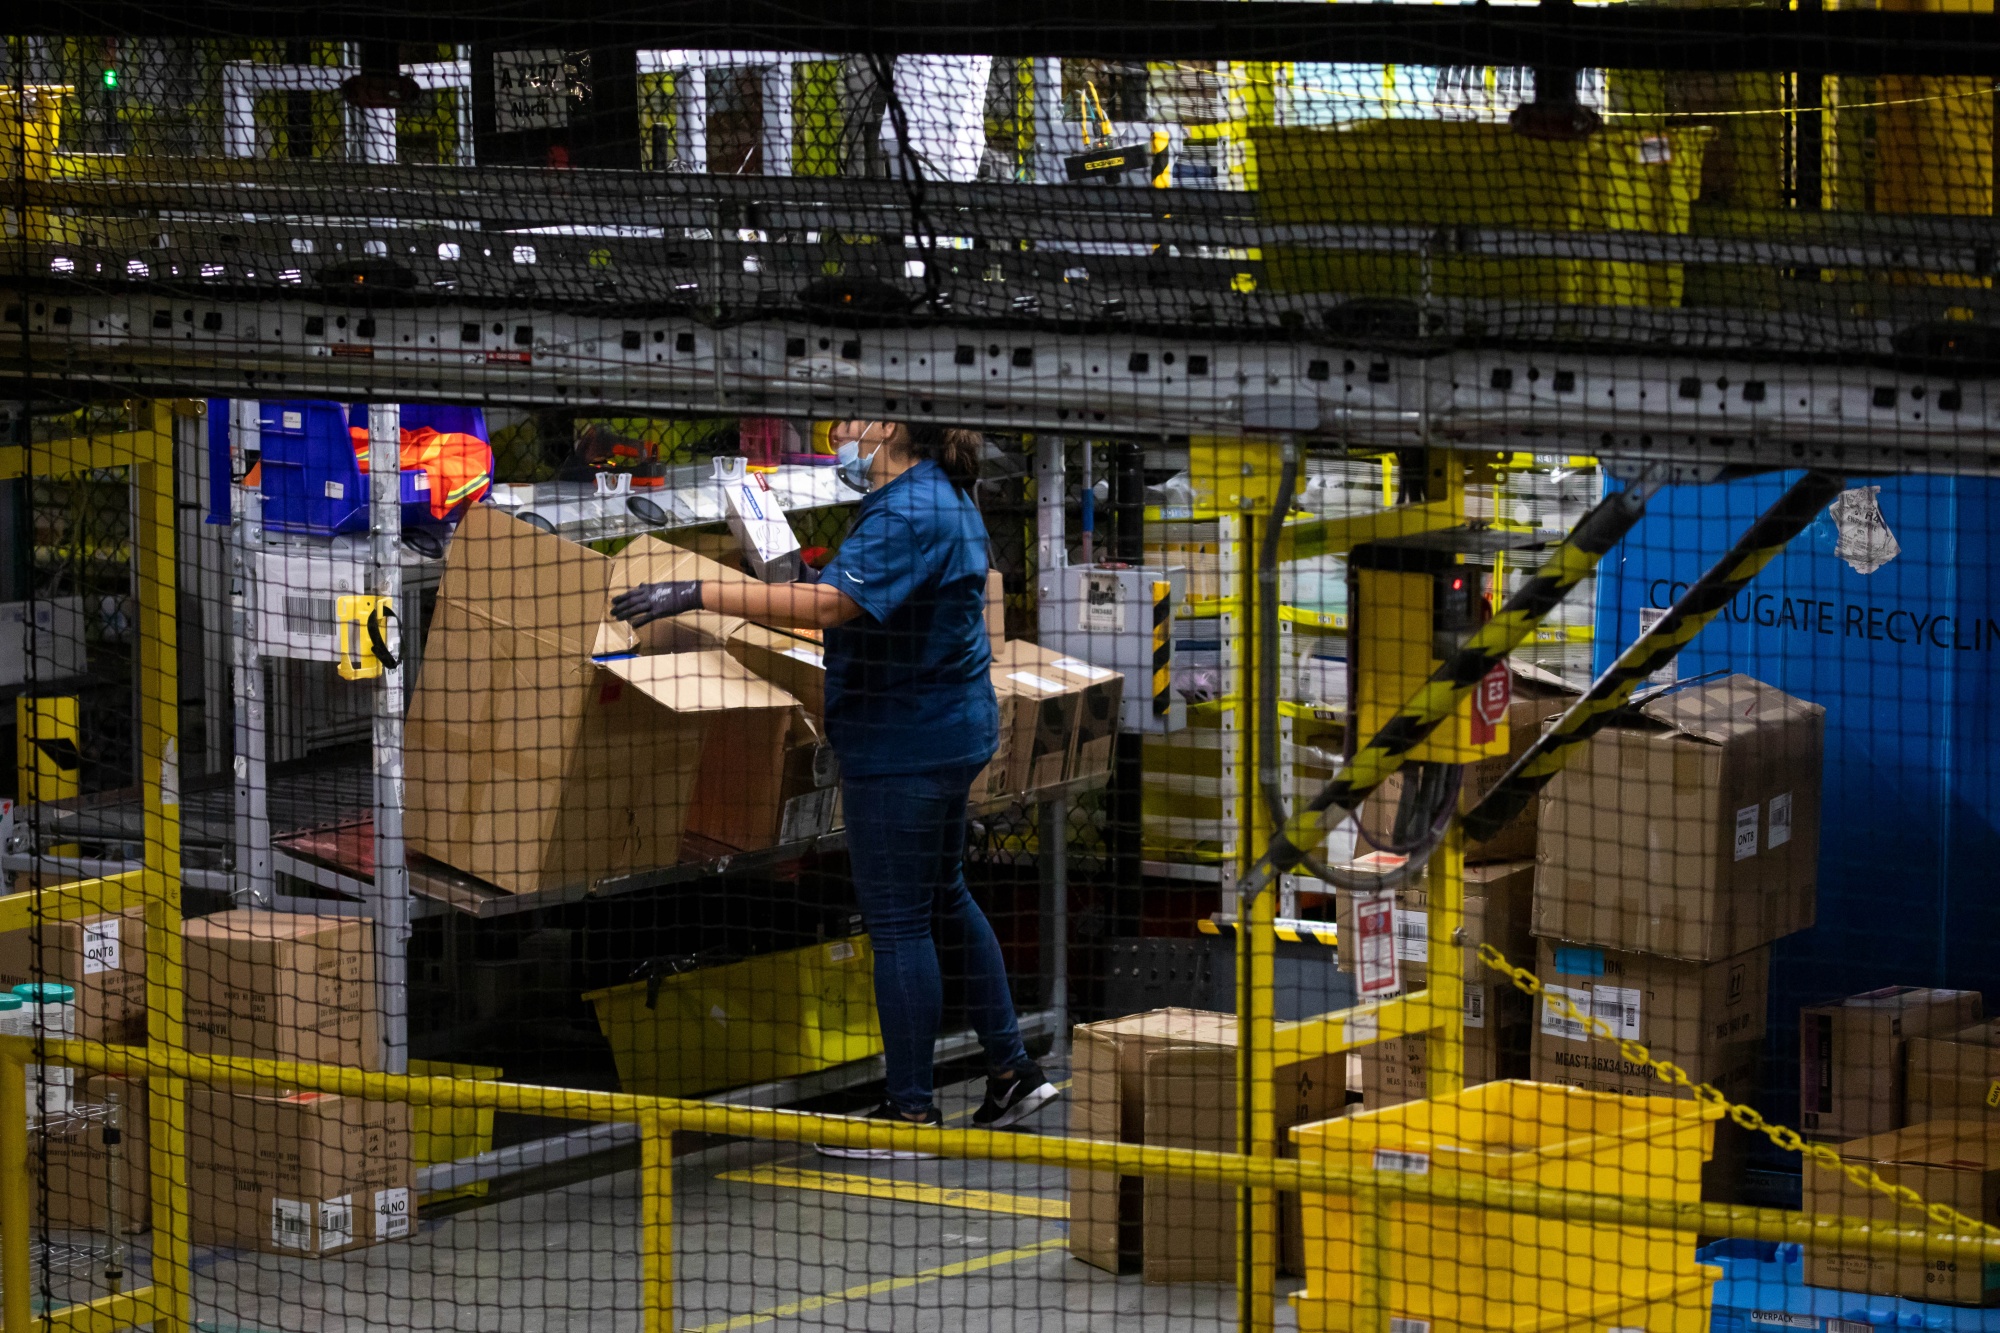 A worker sorts merchandise at an Amazon fulfillment center in Robbinsville, New Jersey.